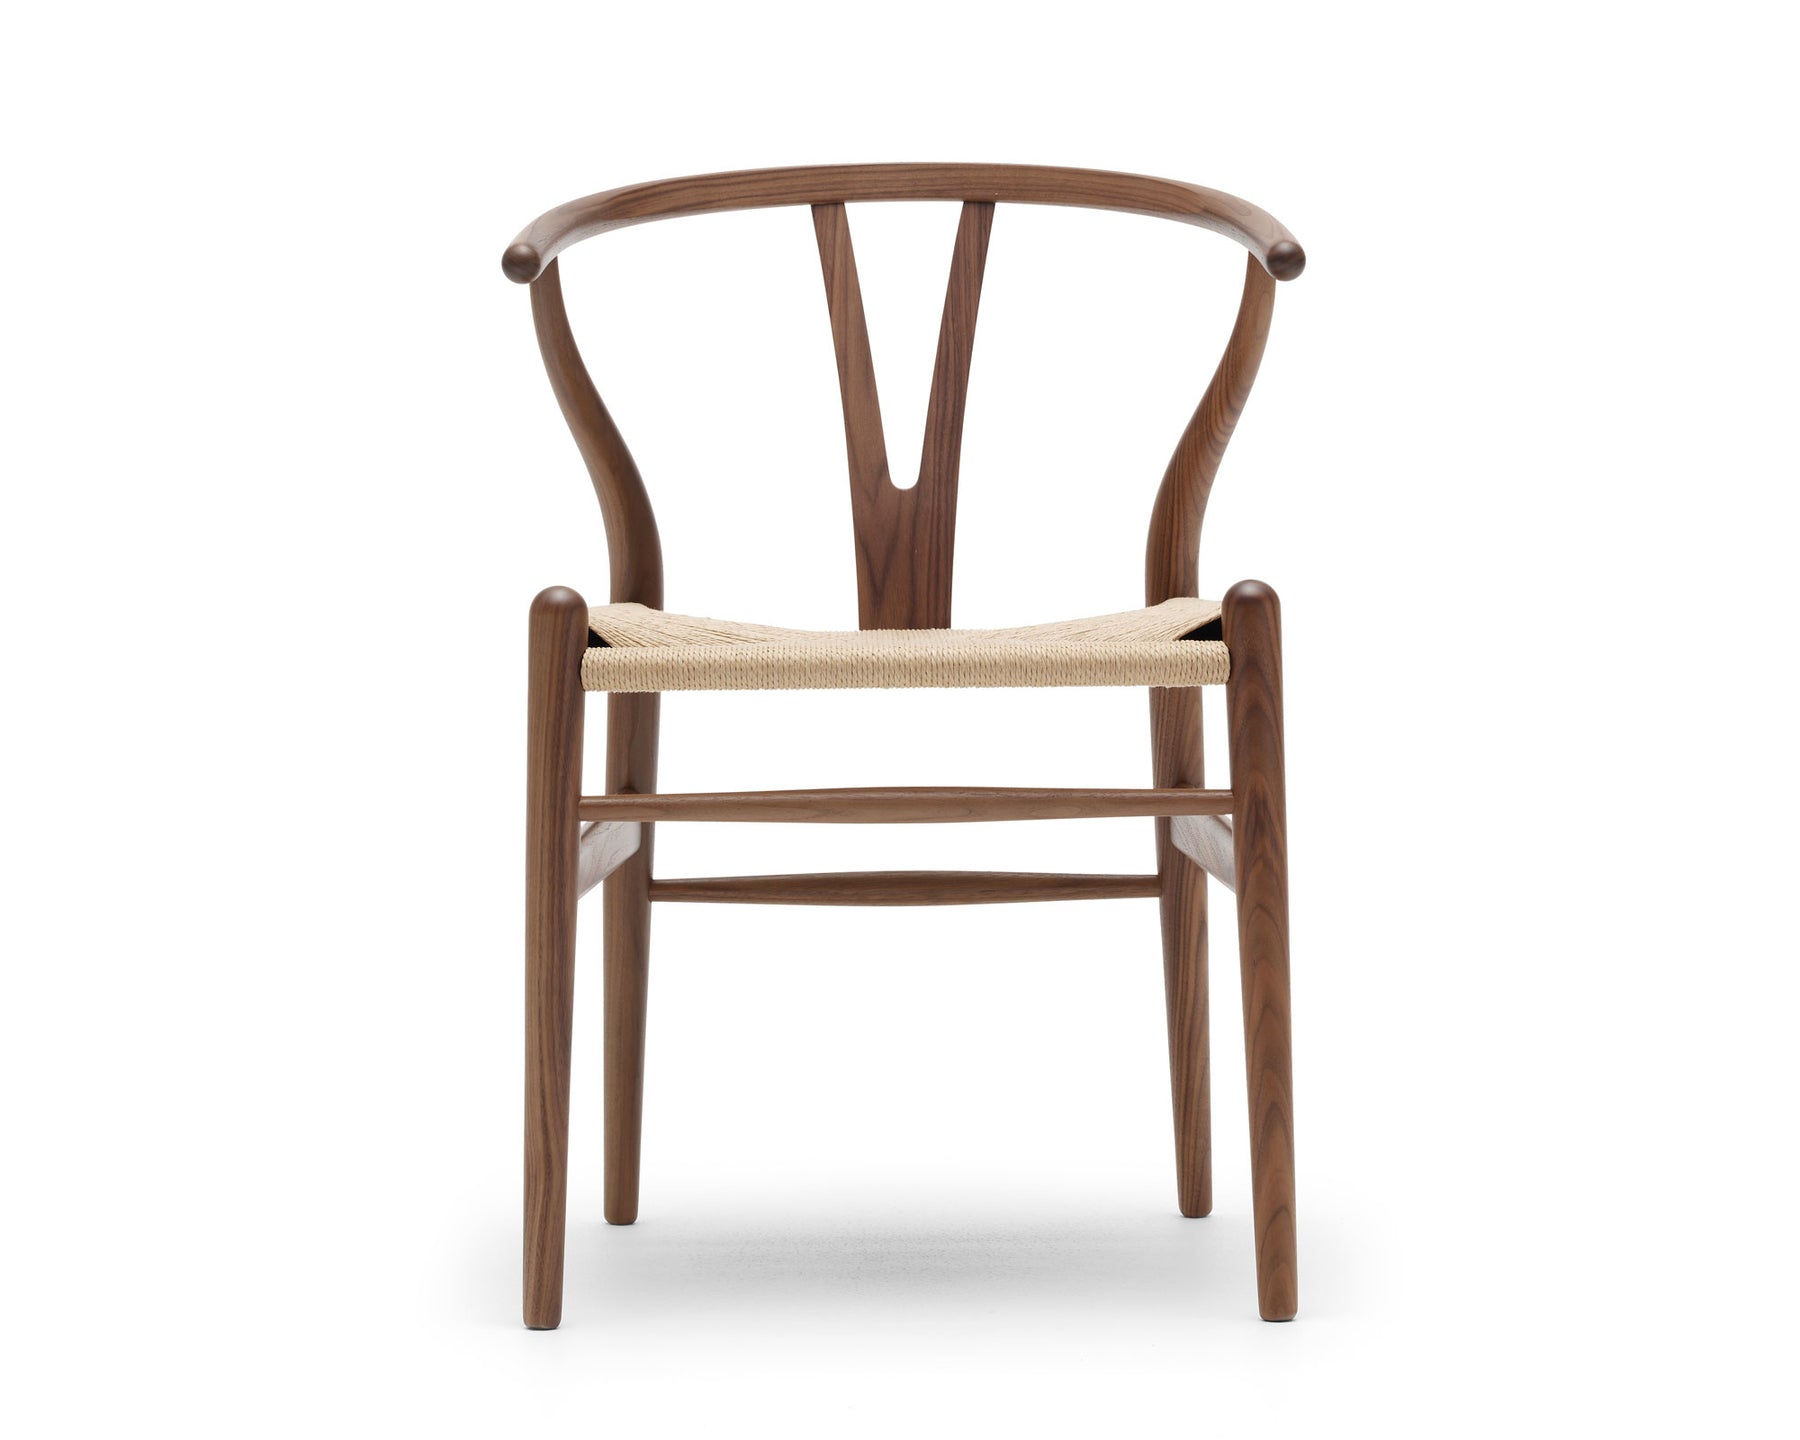 Walnut & Paper Cord Dining Chair | DSHOP